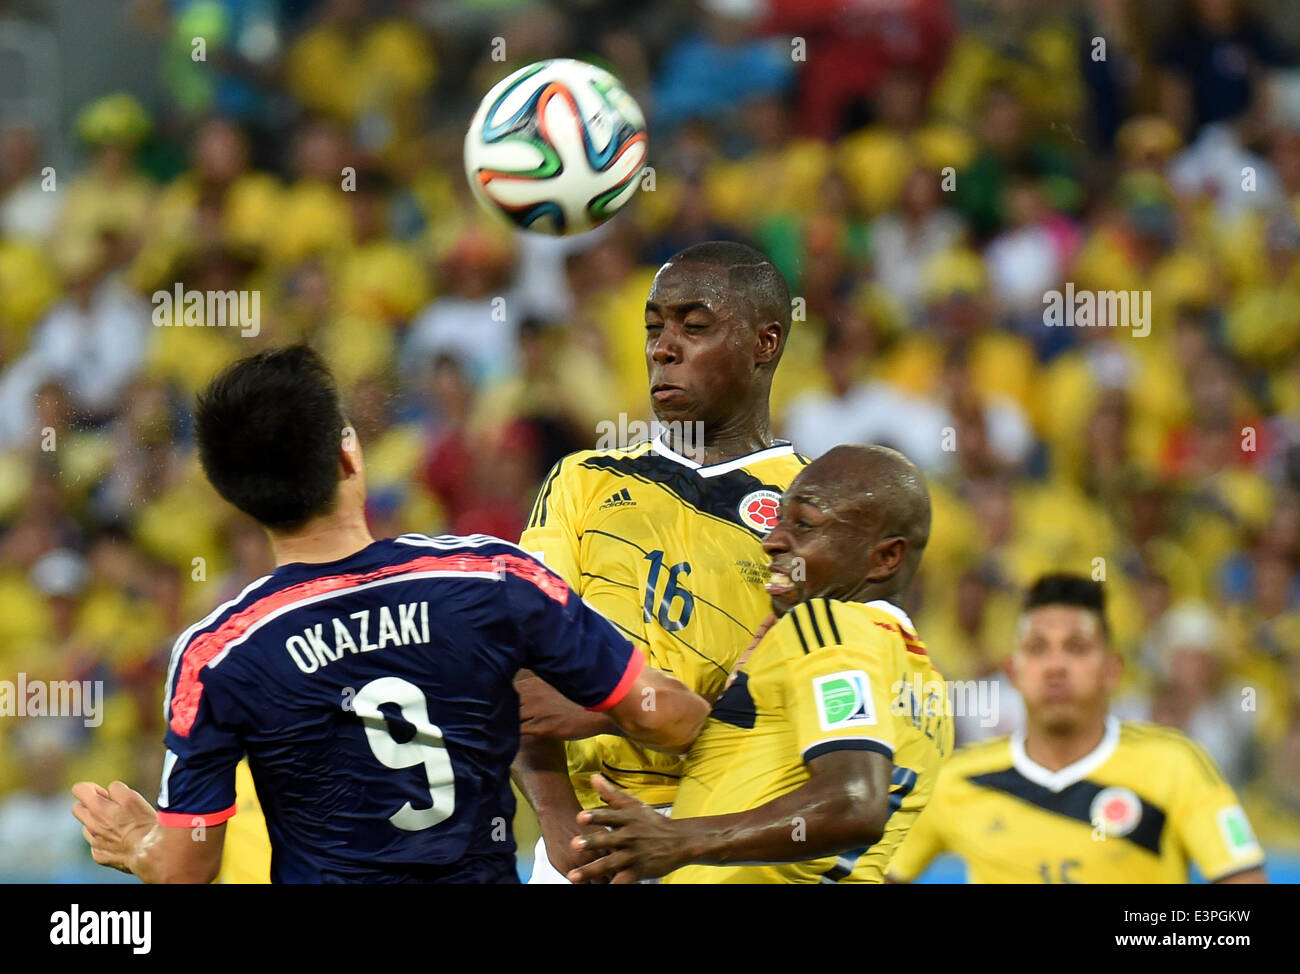 (140624) -- CUIABA, June 24, 2014 (Xinhua) -- Colombia's Eder Alvarez Balanta (C) competes for a header during a Group C match between Japan and Colombia of 2014 FIFA World Cup at the Arena Pantanal Stadium in Cuiaba, Brazil, June 24, 2014. (Xinhua/Liu Dawei) Stock Photo